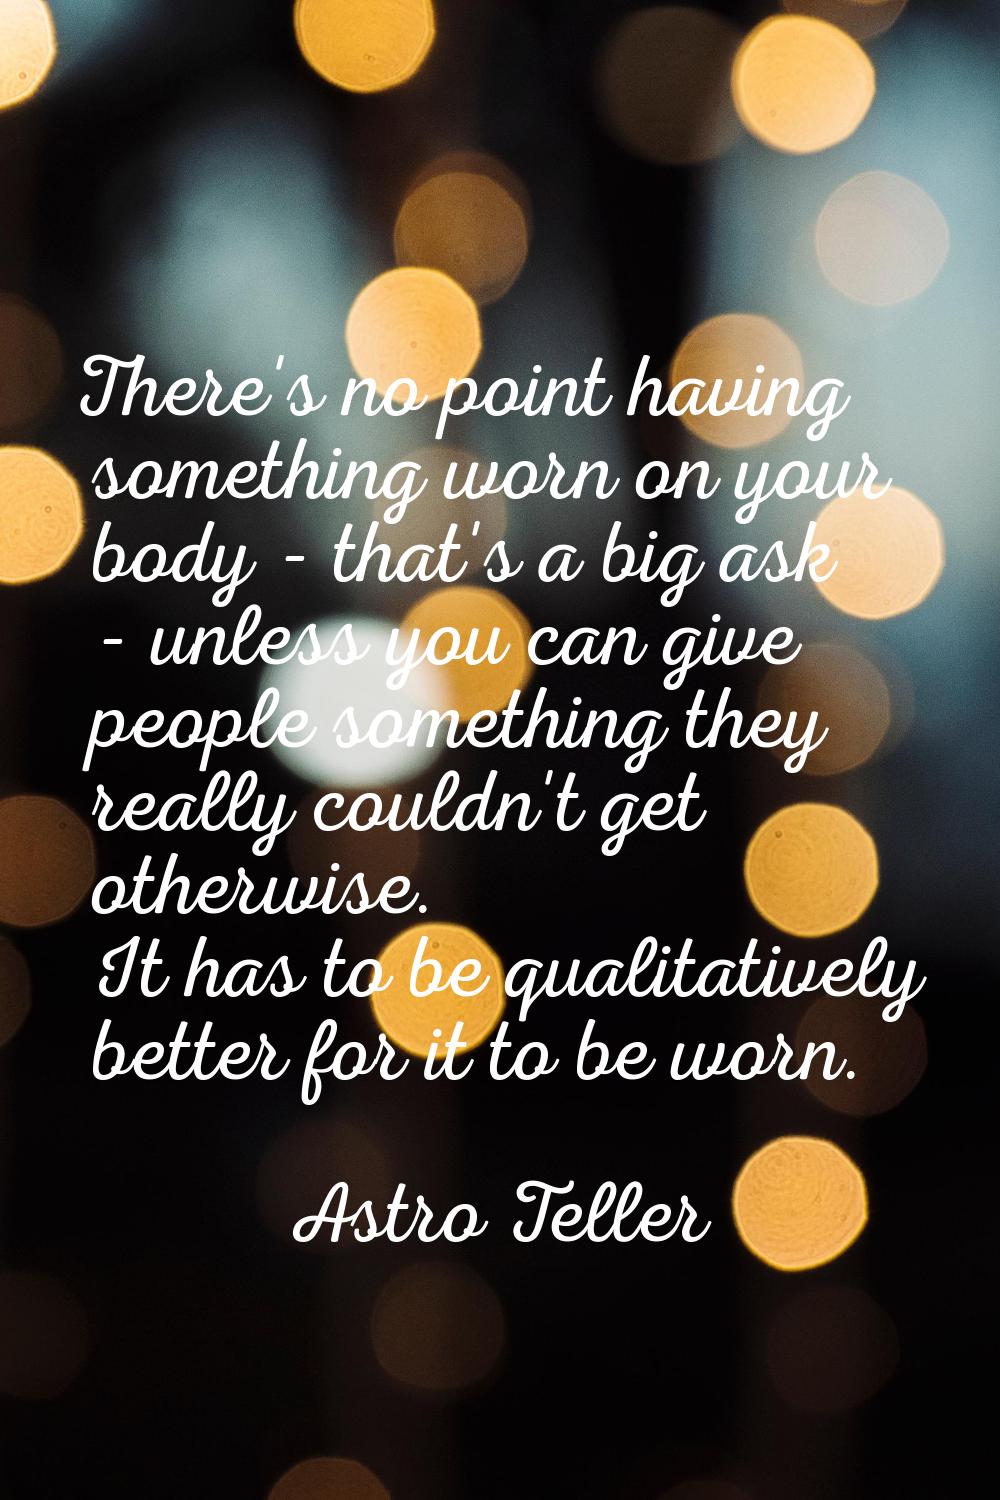 There's no point having something worn on your body - that's a big ask - unless you can give people